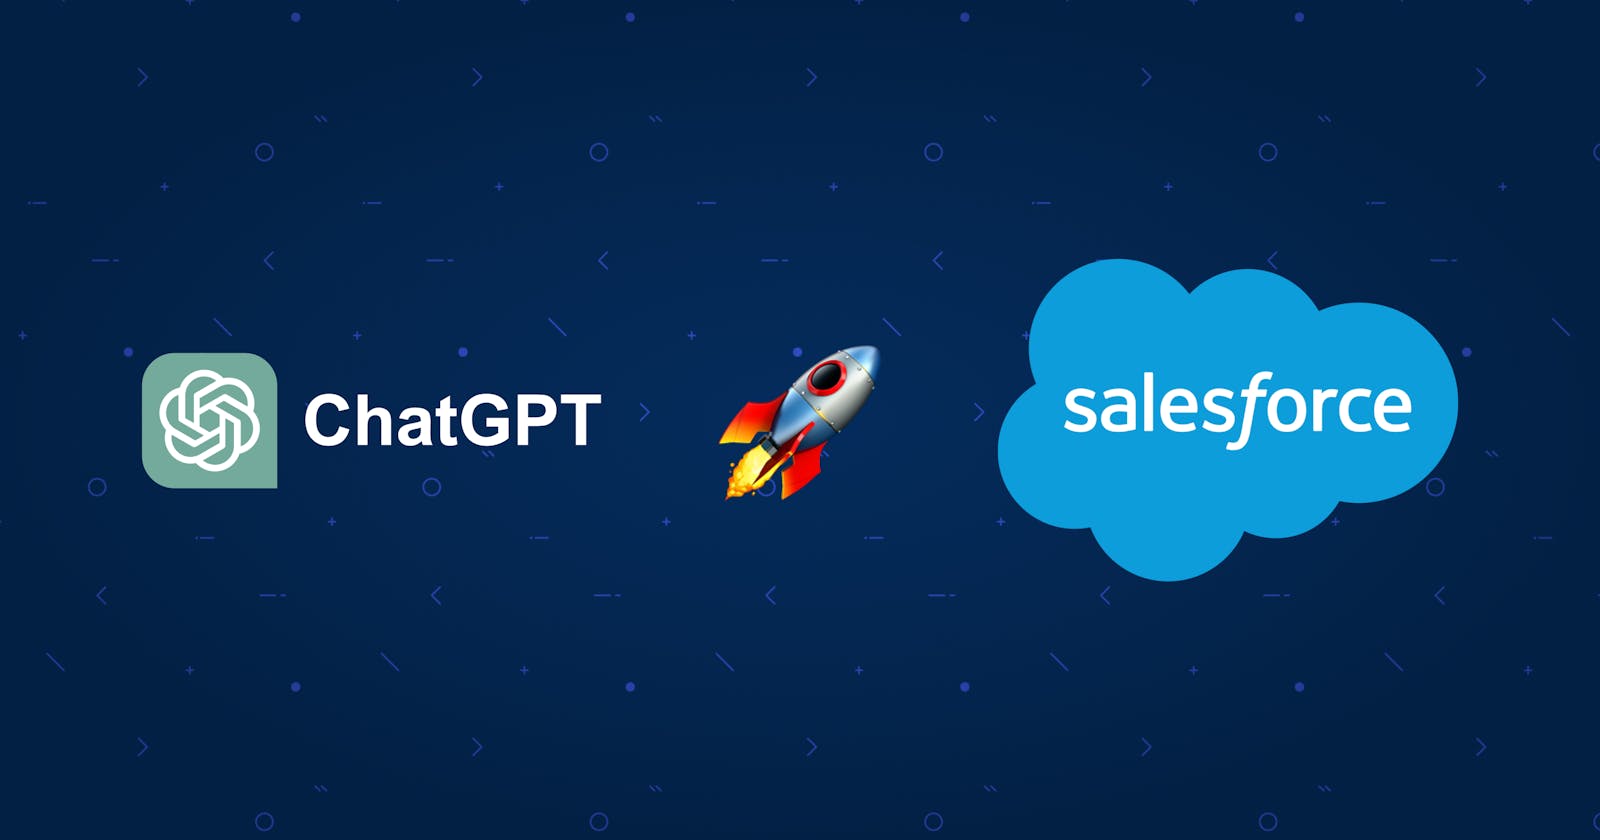 5 Simple ChatGPT Prompts That Help Me Build Salesforce Solutions Faster